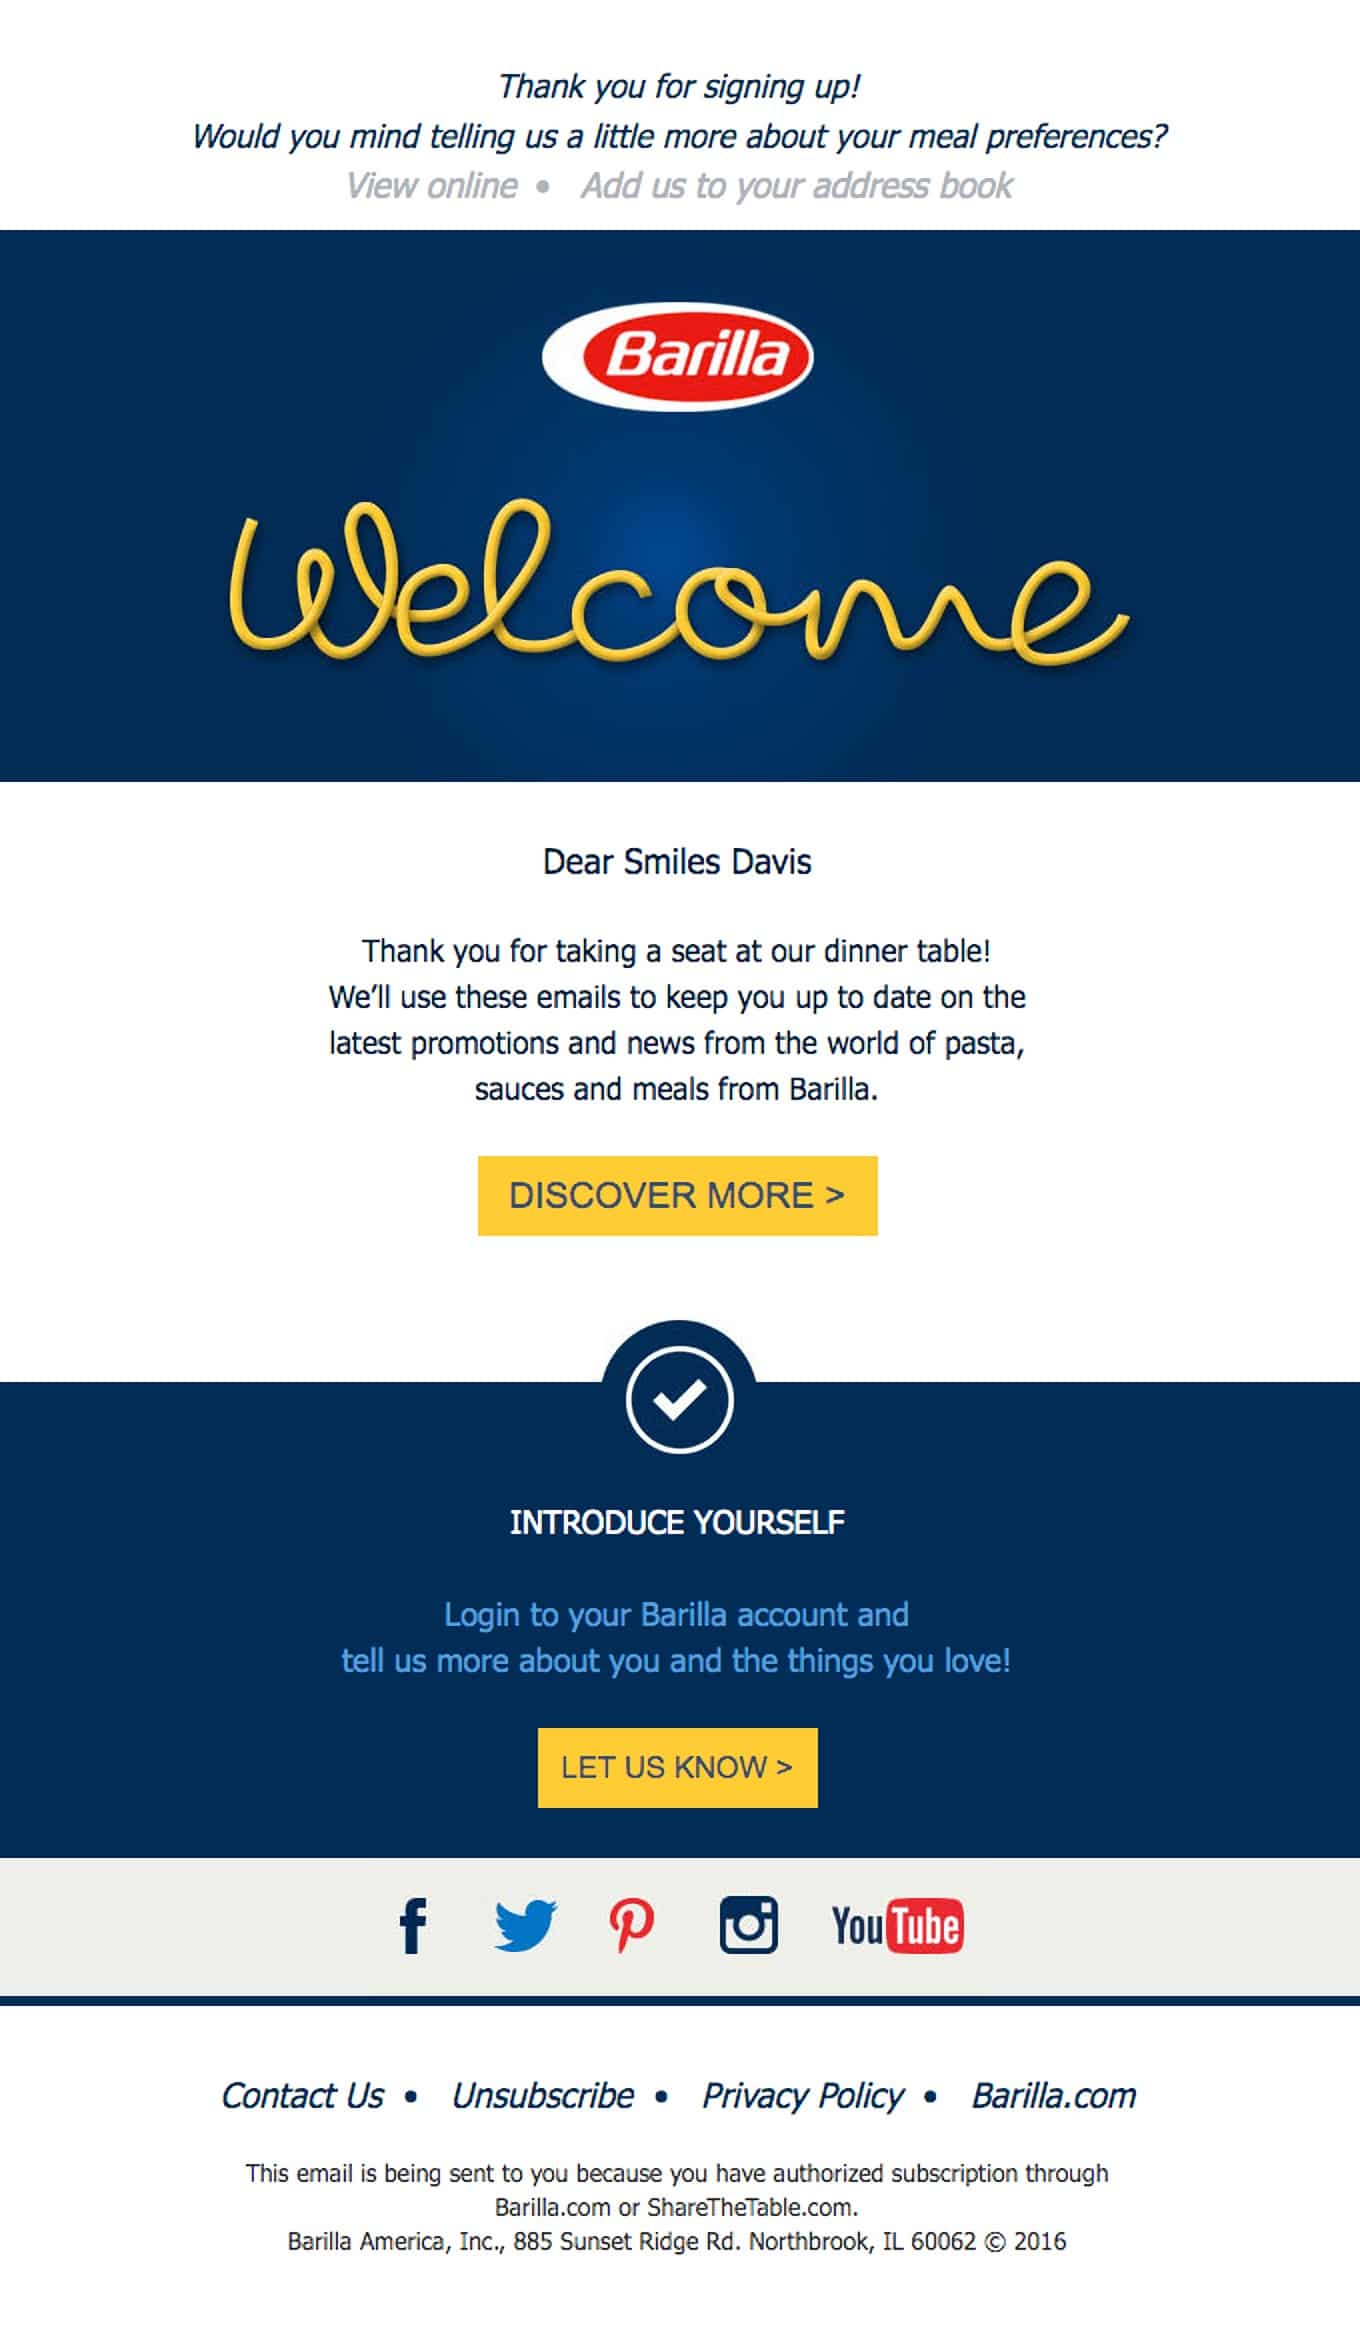 Welcome email from Barilla